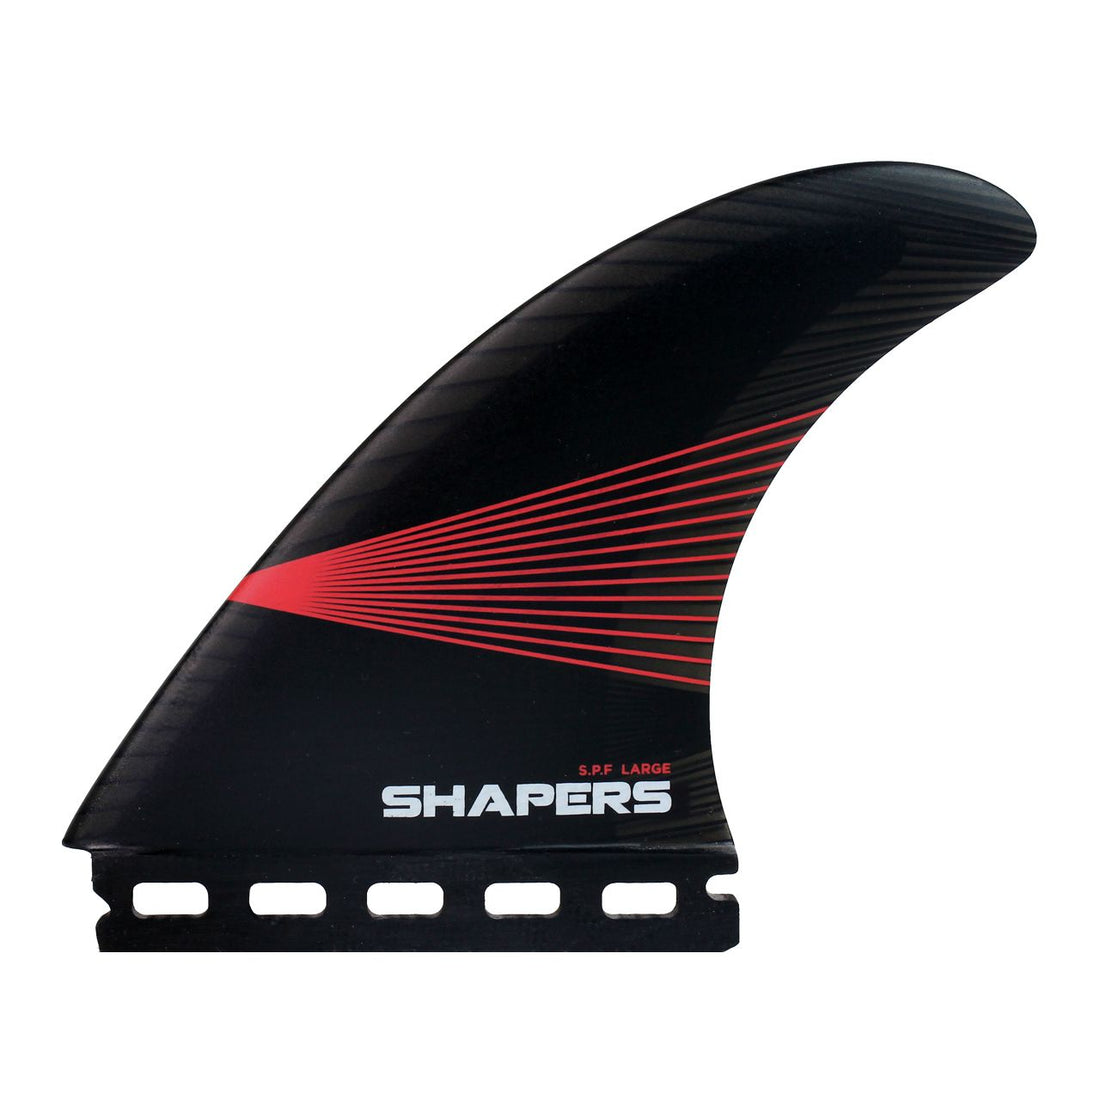 SHAPERS S.P.F AIRLITE LARGE 3-FIN SINGLE TAB